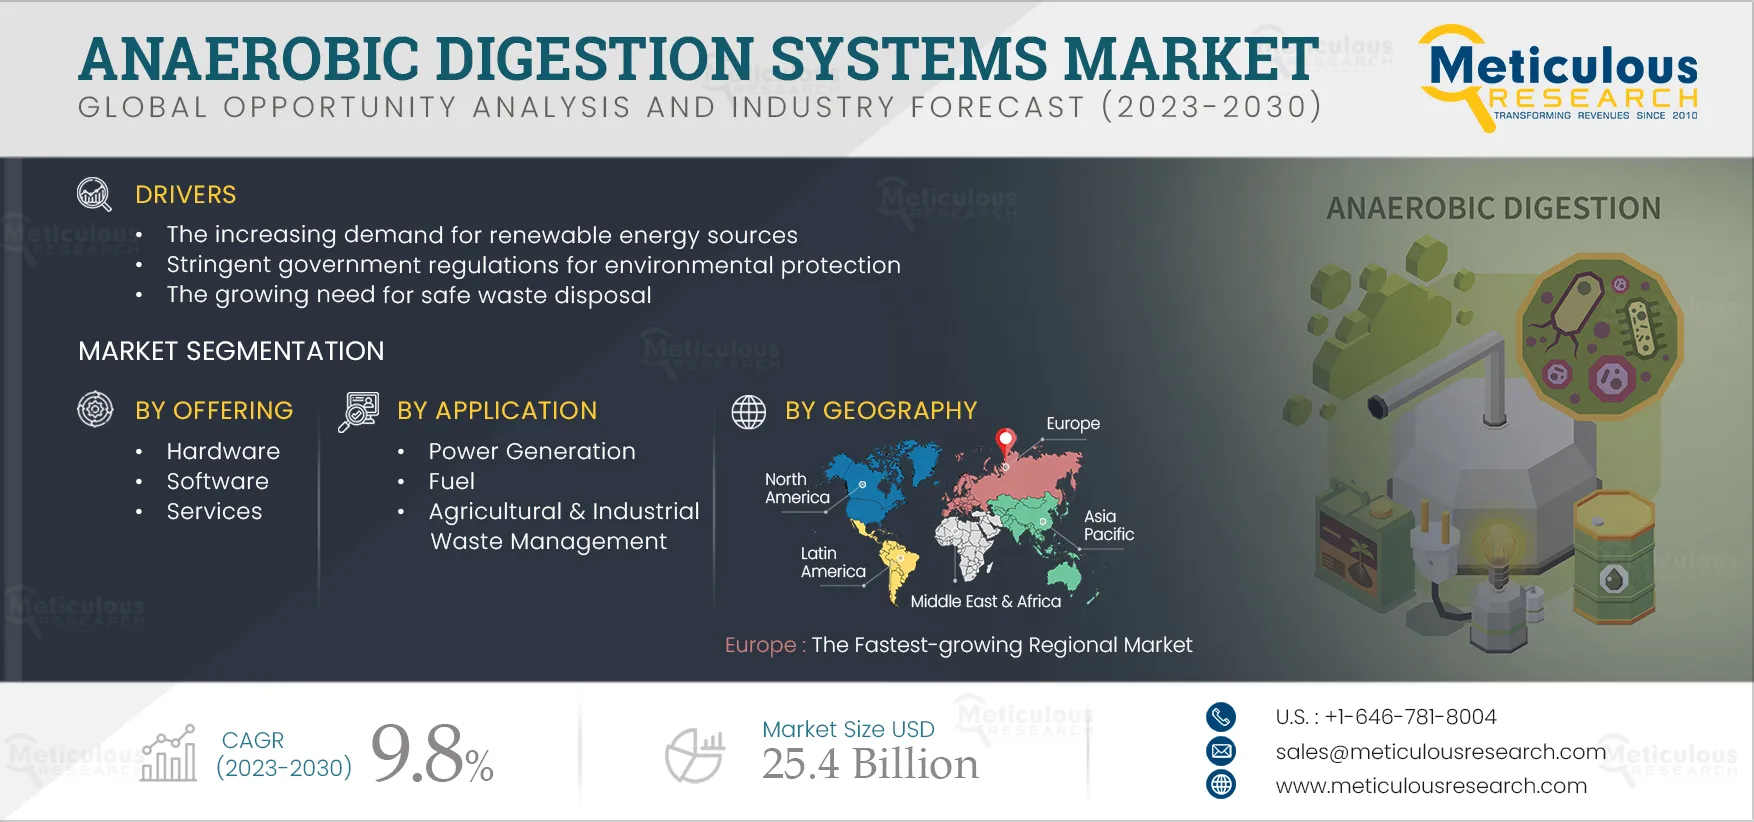 Anaerobic Digestion Systems Market